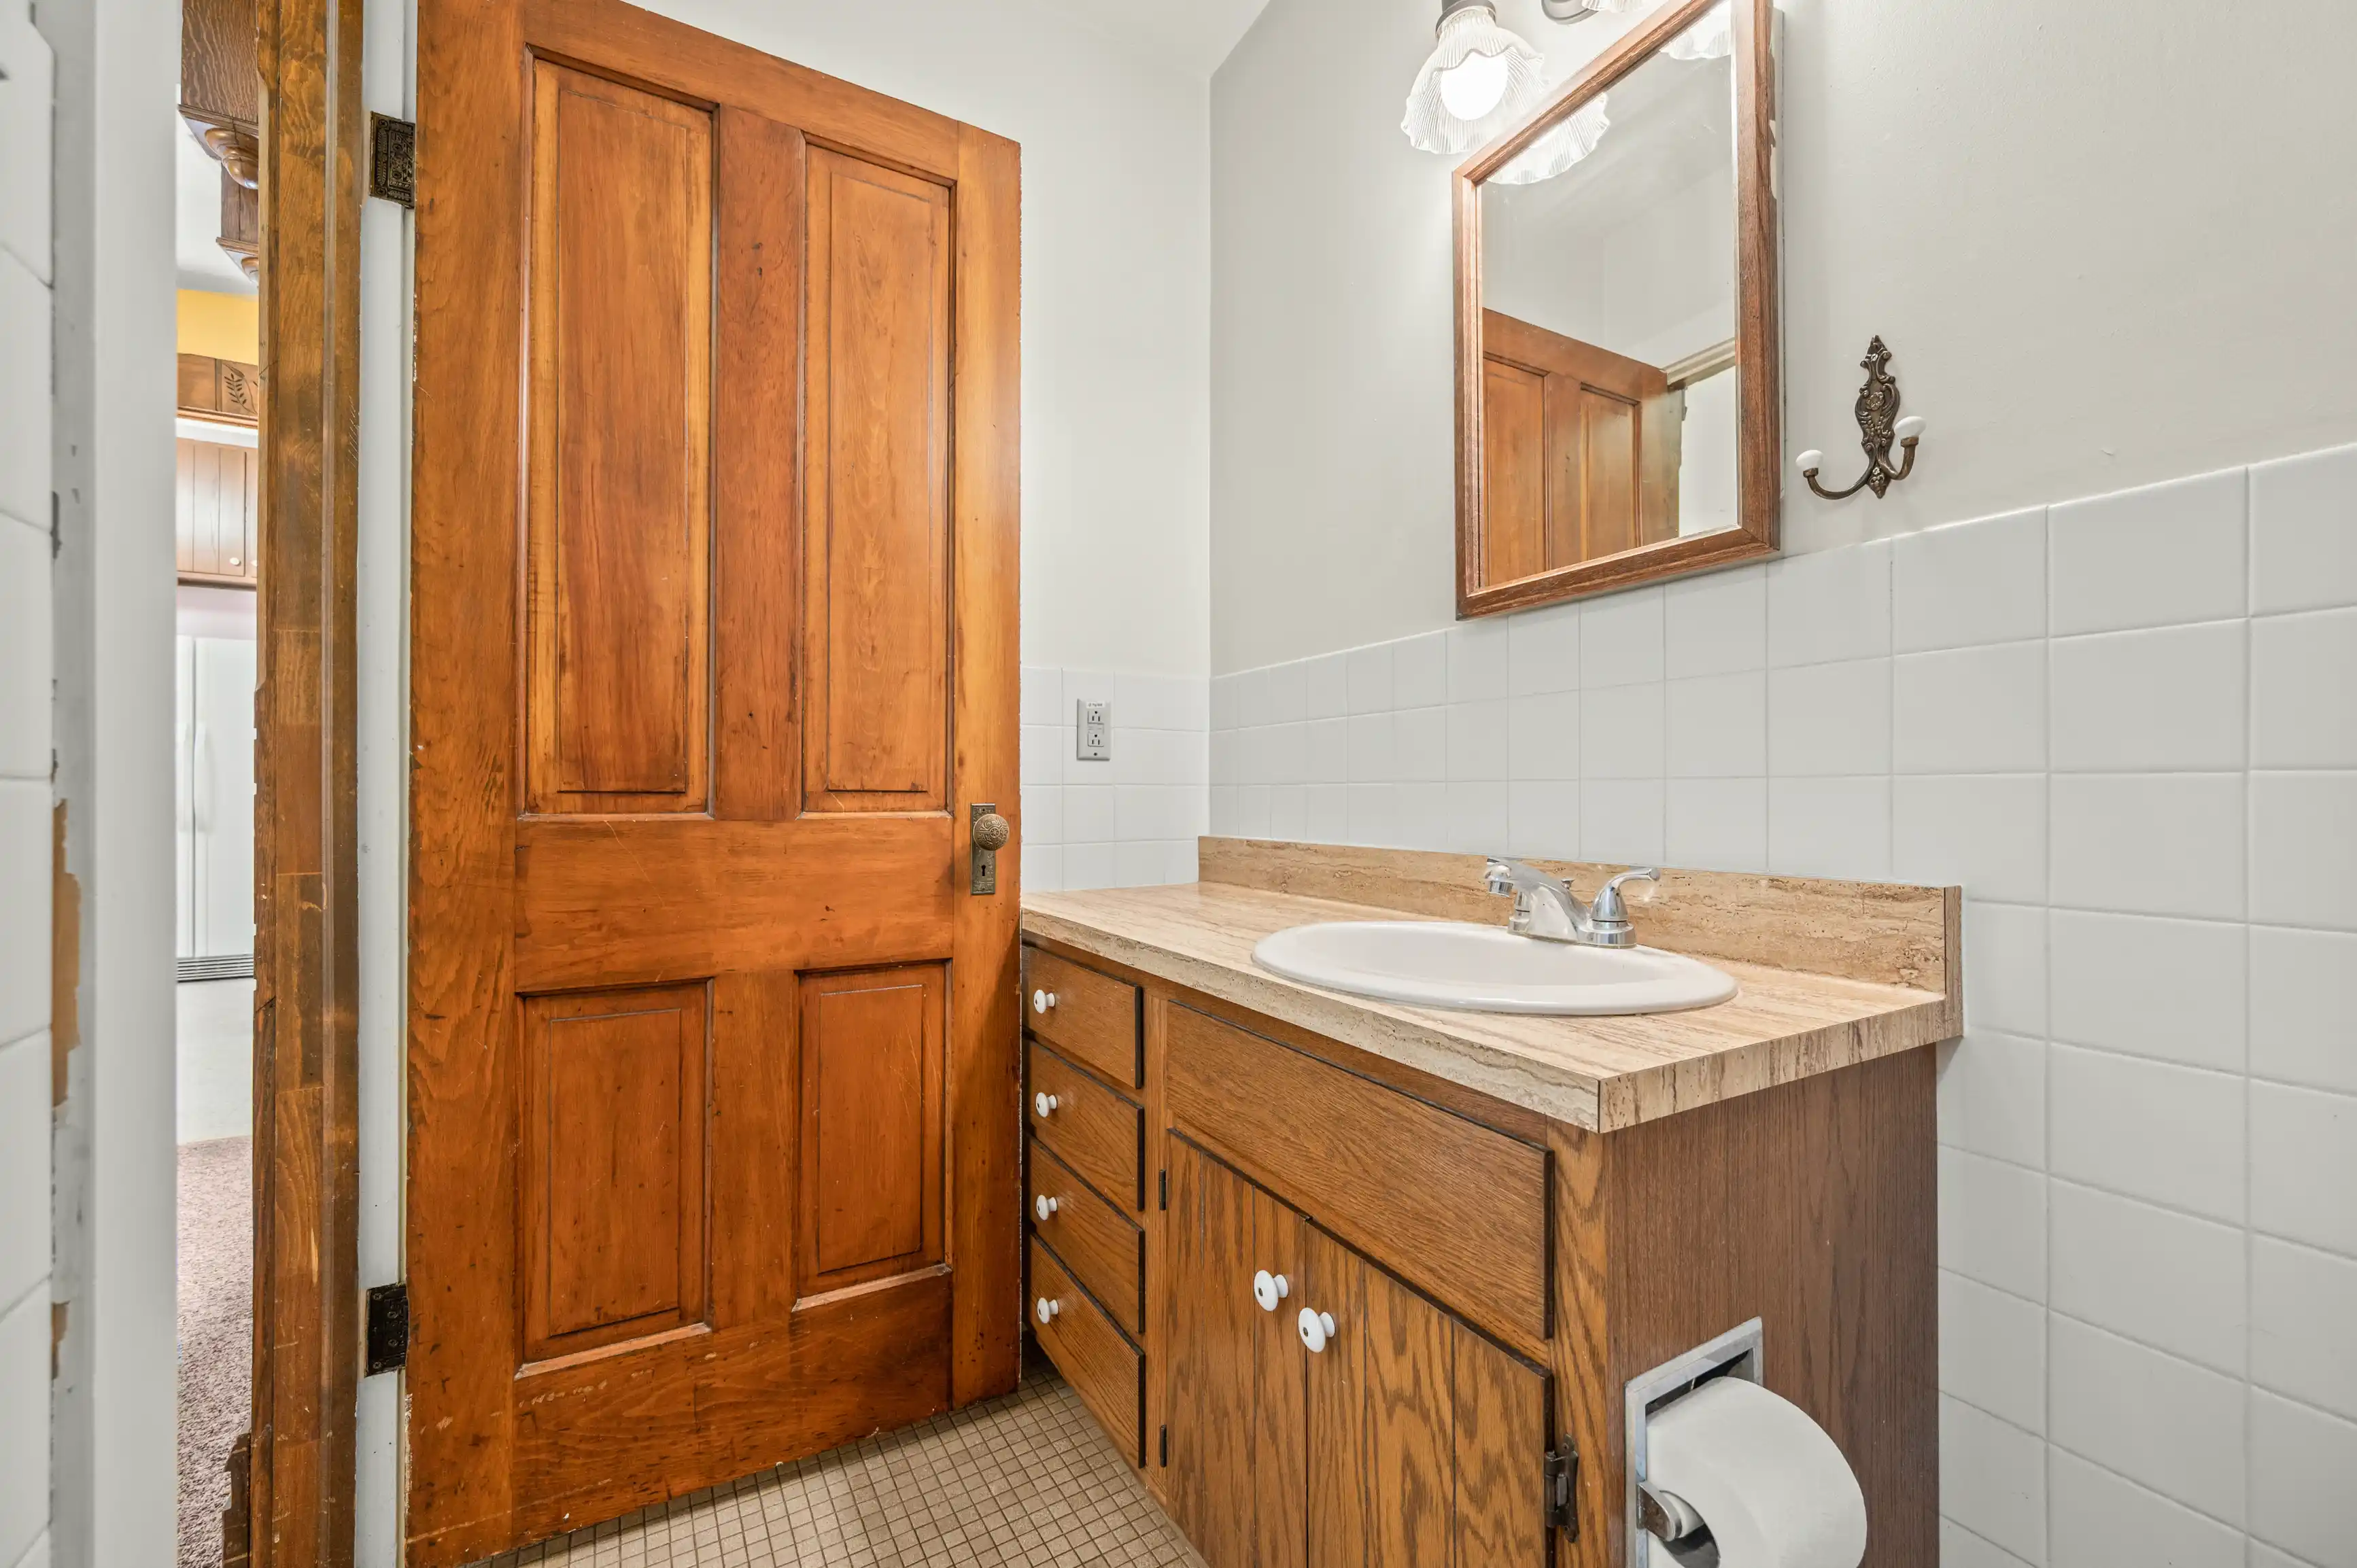 Bright bathroom interior with wooden vanity cabinet, white basin, mirror, and open wooden door leading to another room.